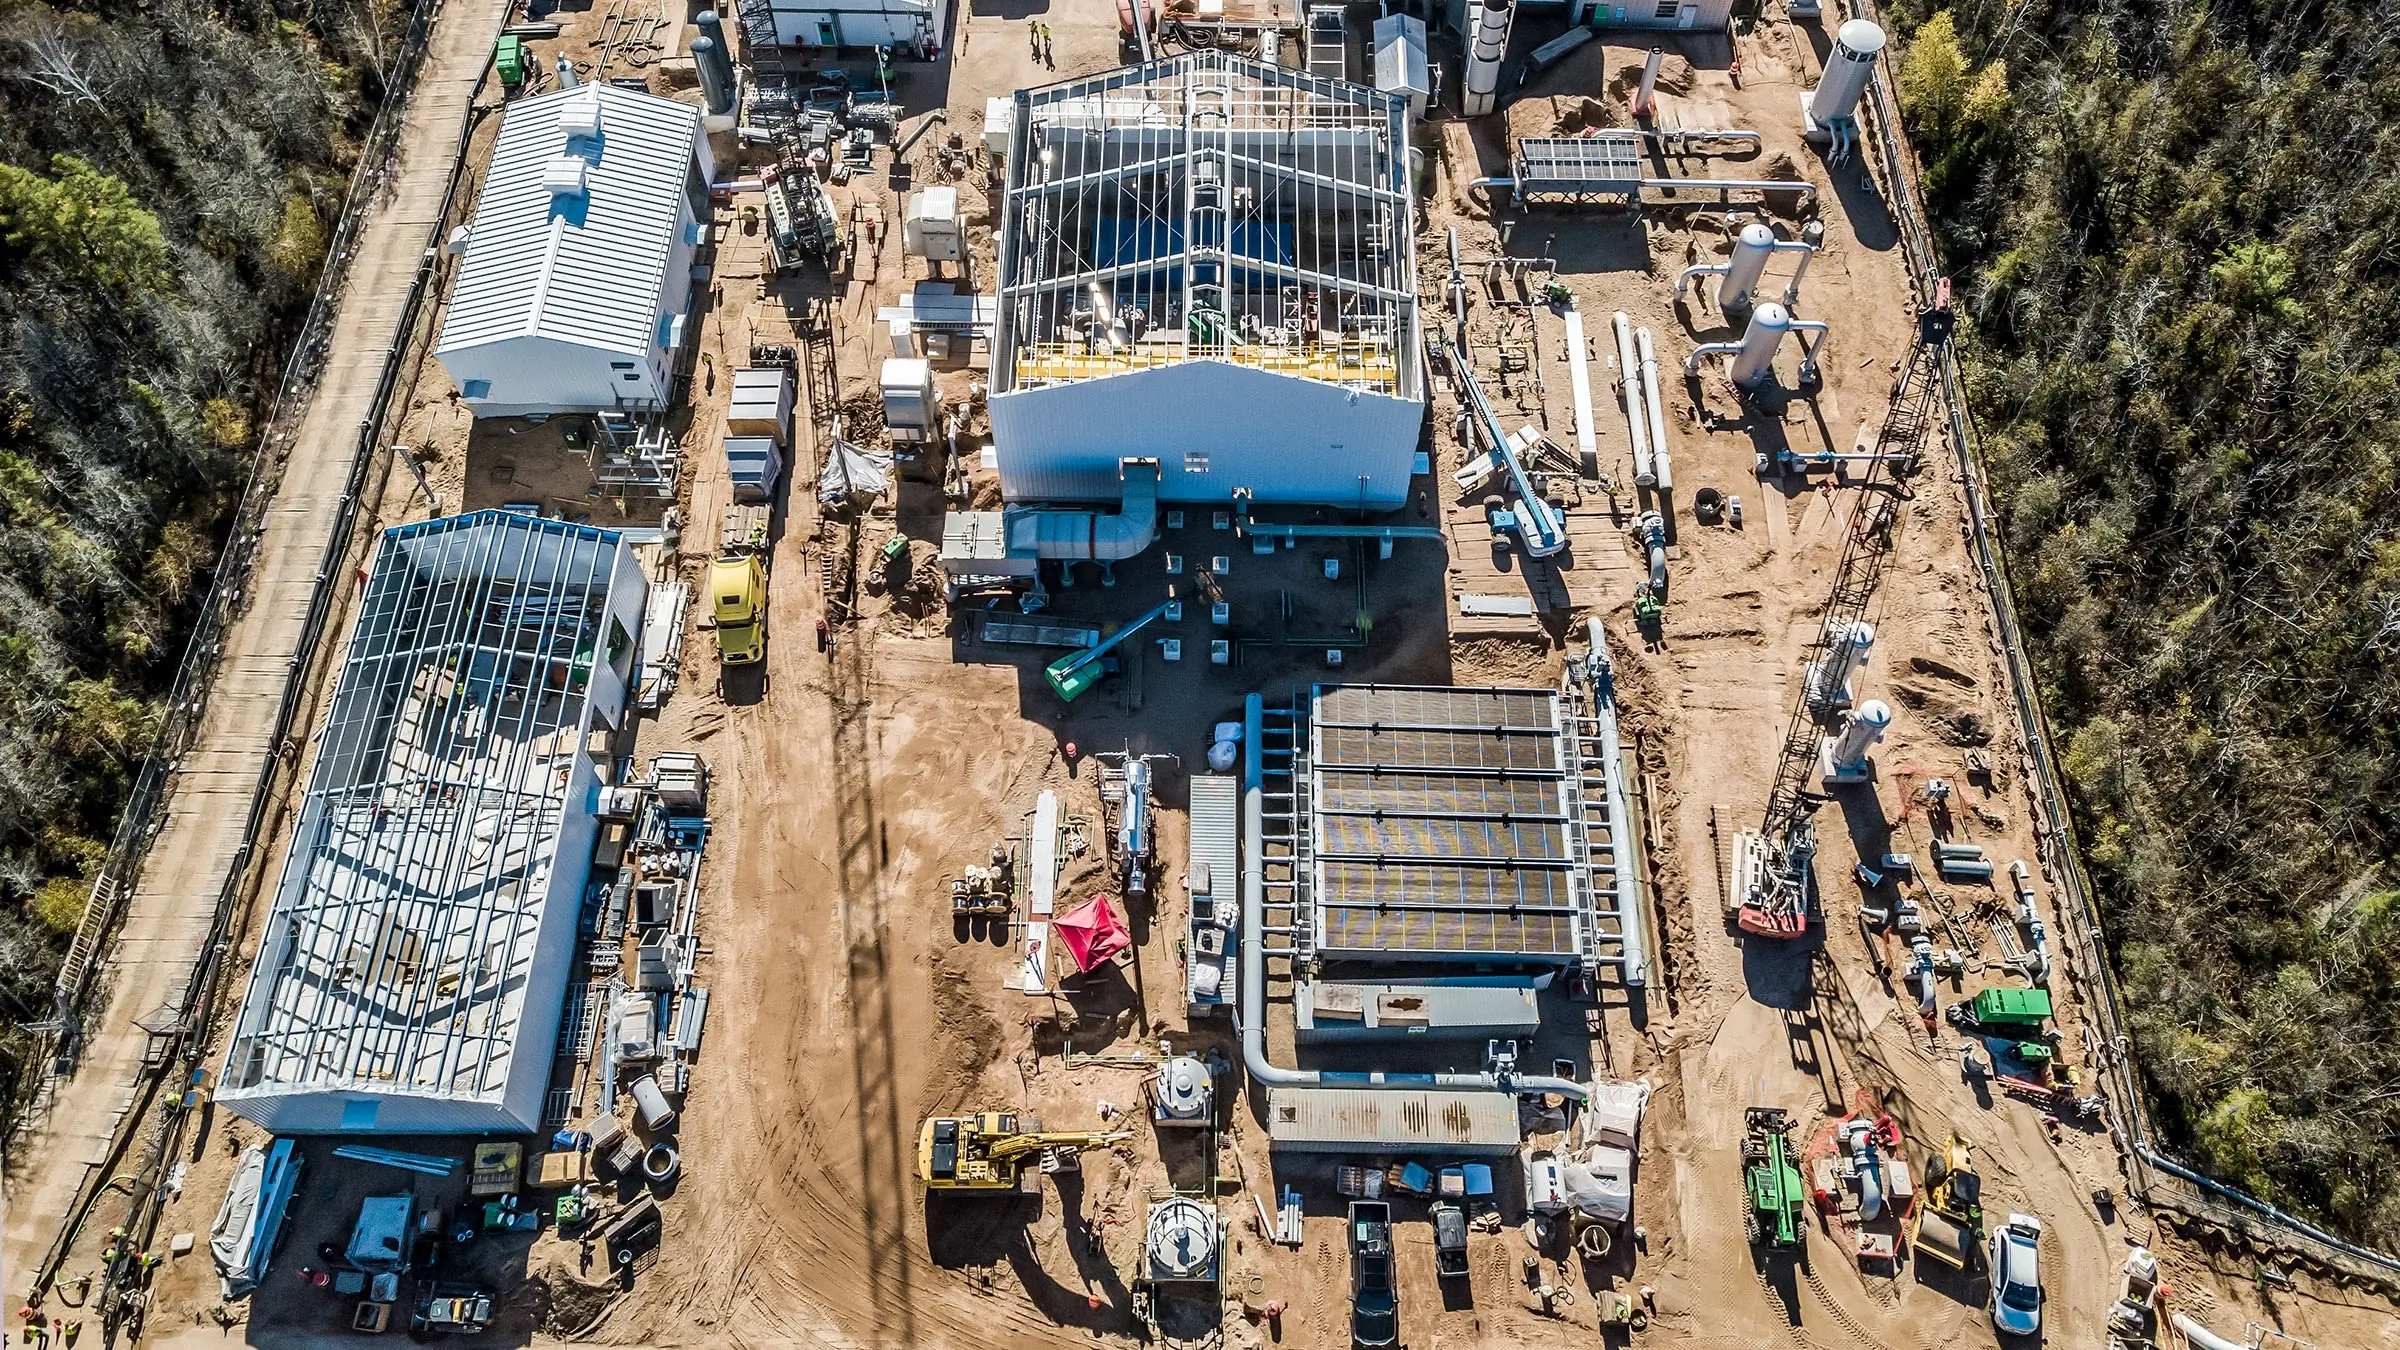 A busy jobsite consisting of buildings and pipes.